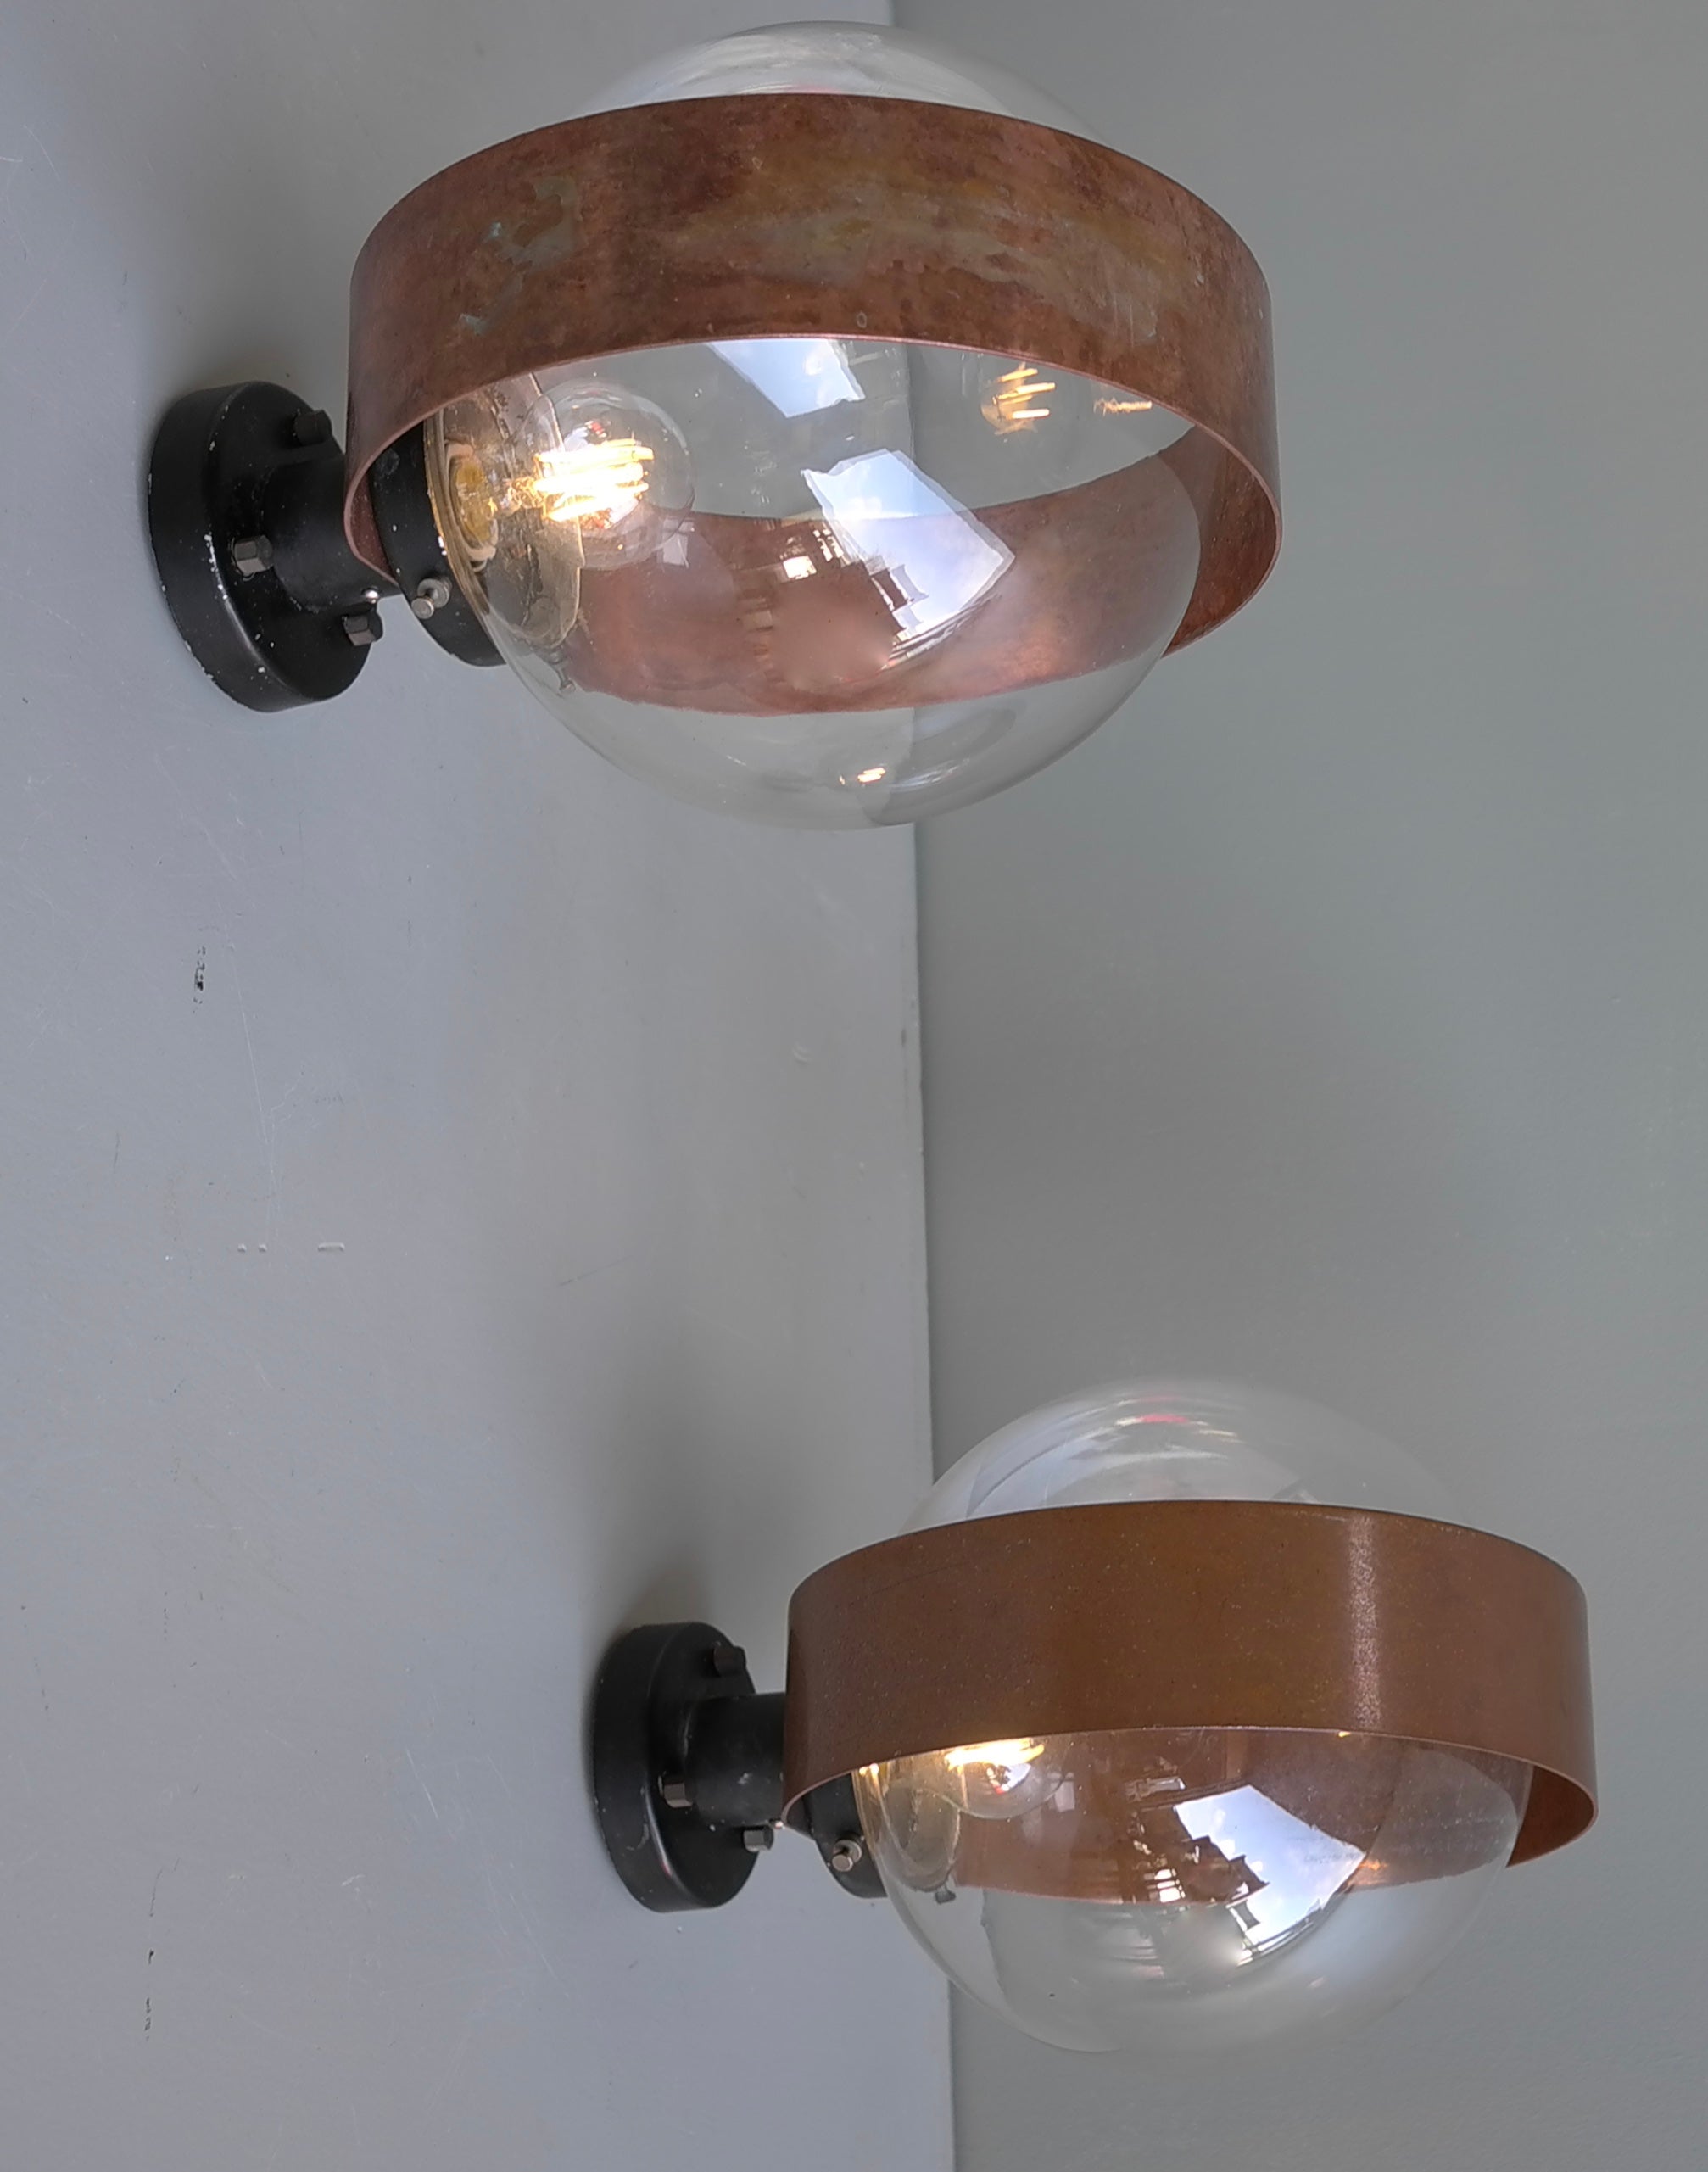 Pair of Scandinavian glass ball wall lamps with Copper Patina Rims, 1960's


These can also be used as a flushmount. Lovely patina to the Copper Rims.